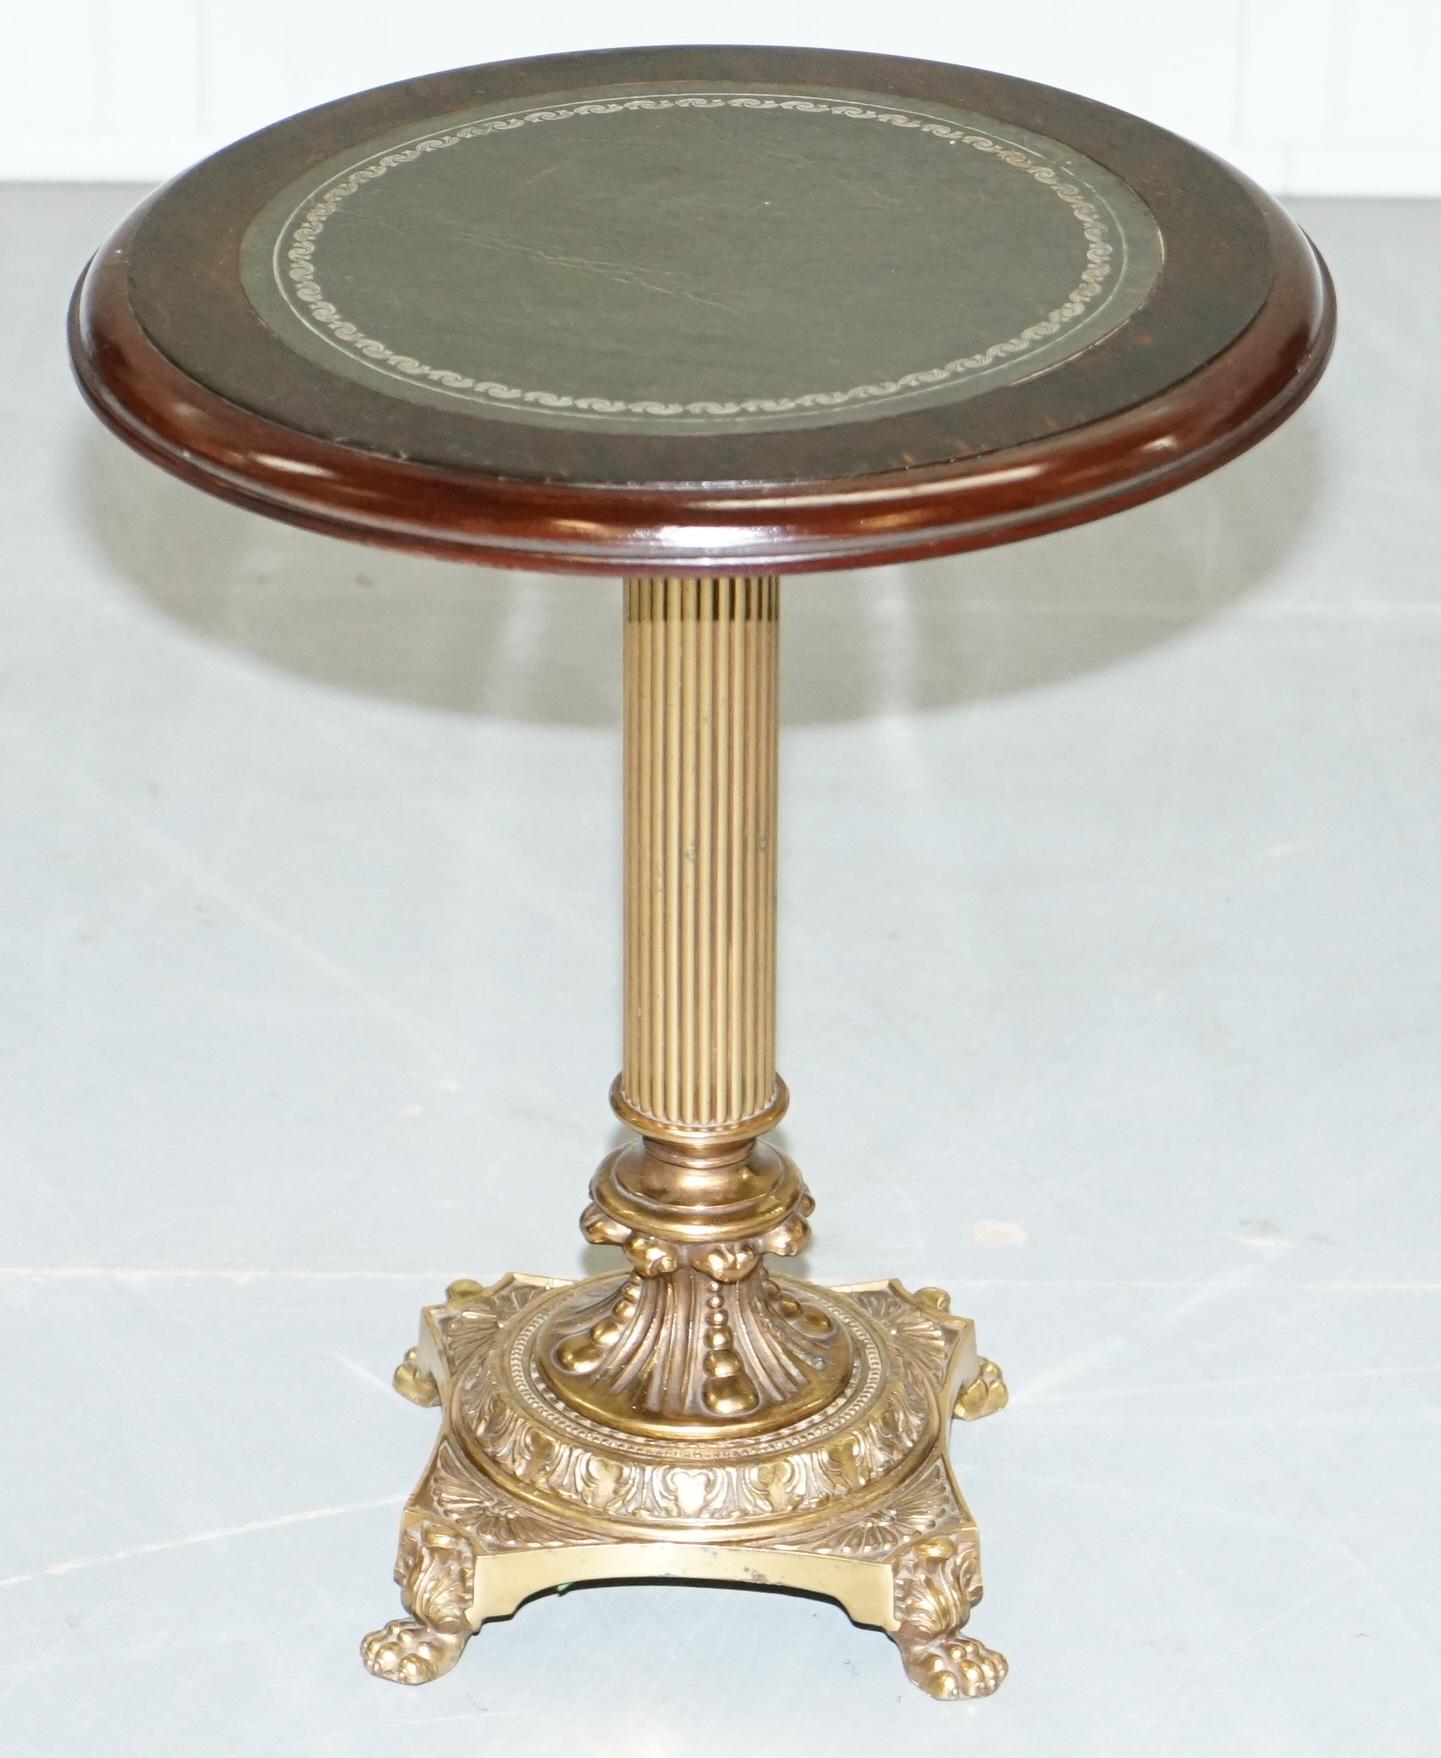 We are delighted to offer for sale this lovely small Regency style brass side table with mahogany and green leather top

A good looking and well made piece, the table is the perfect size for a lamp or drinks, its rare to find brass based furniture